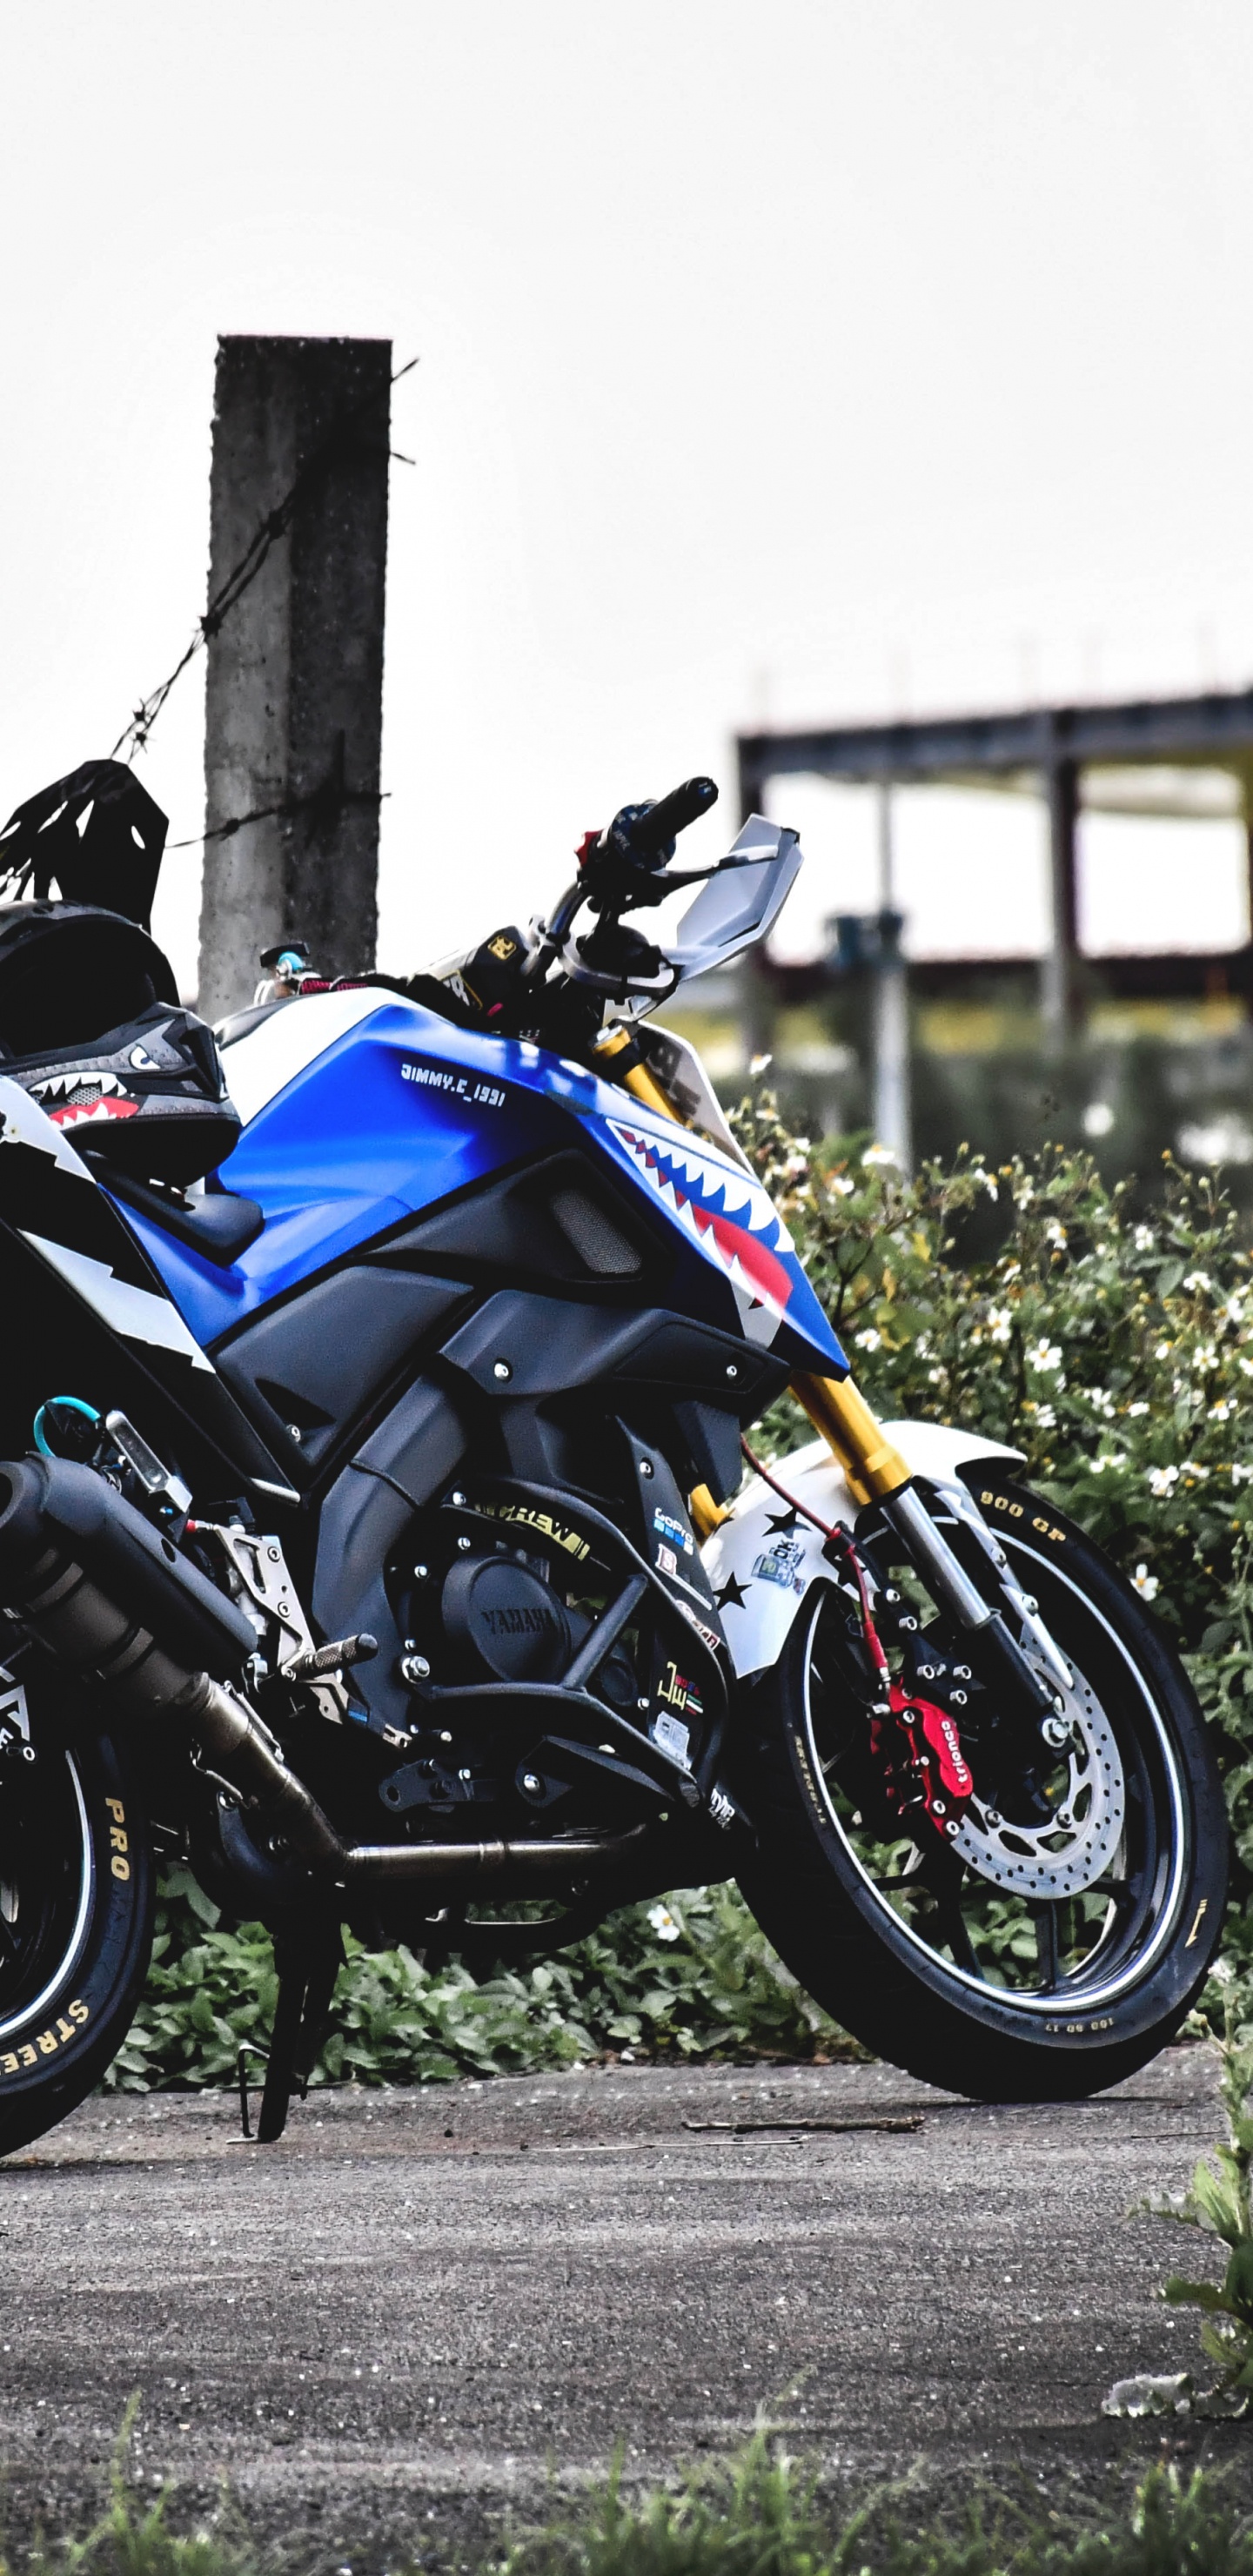 Black and Blue Sports Bike Parked on Gray Concrete Road During Daytime. Wallpaper in 1440x2960 Resolution